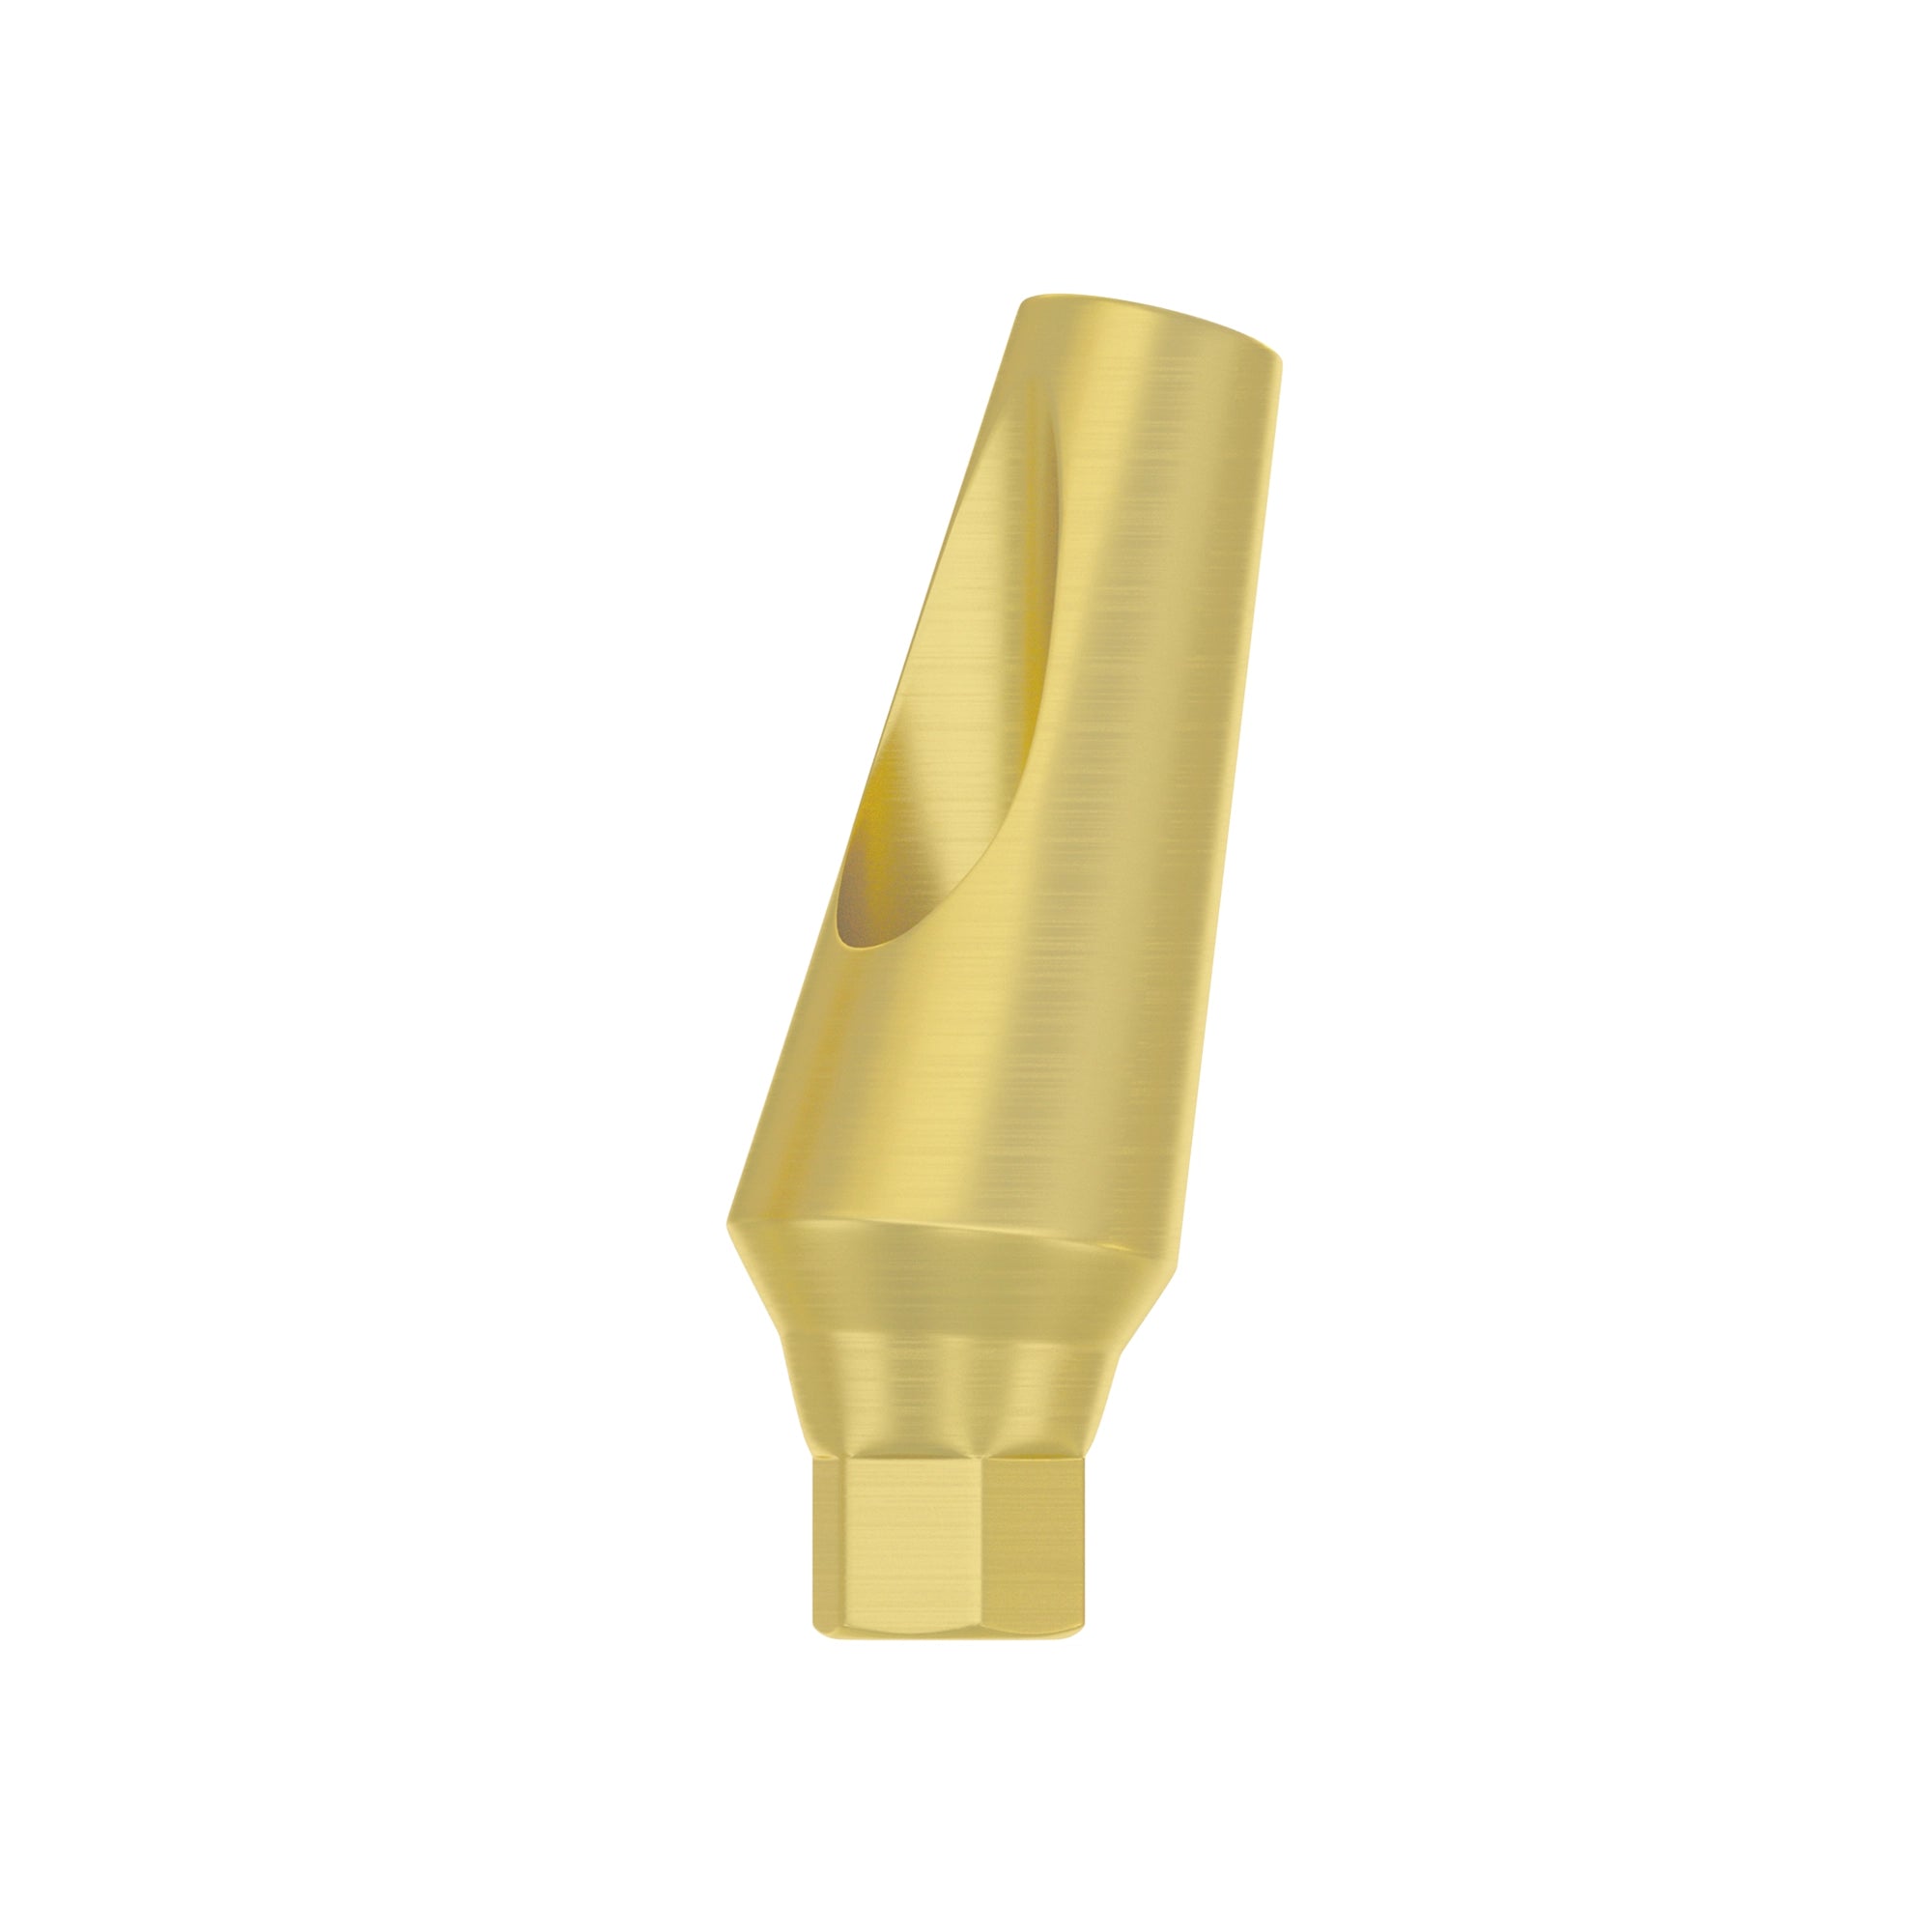 DSI Angulated 15° Regular Abutment 3.6mm - Conical Connection NP Ø3.5mm